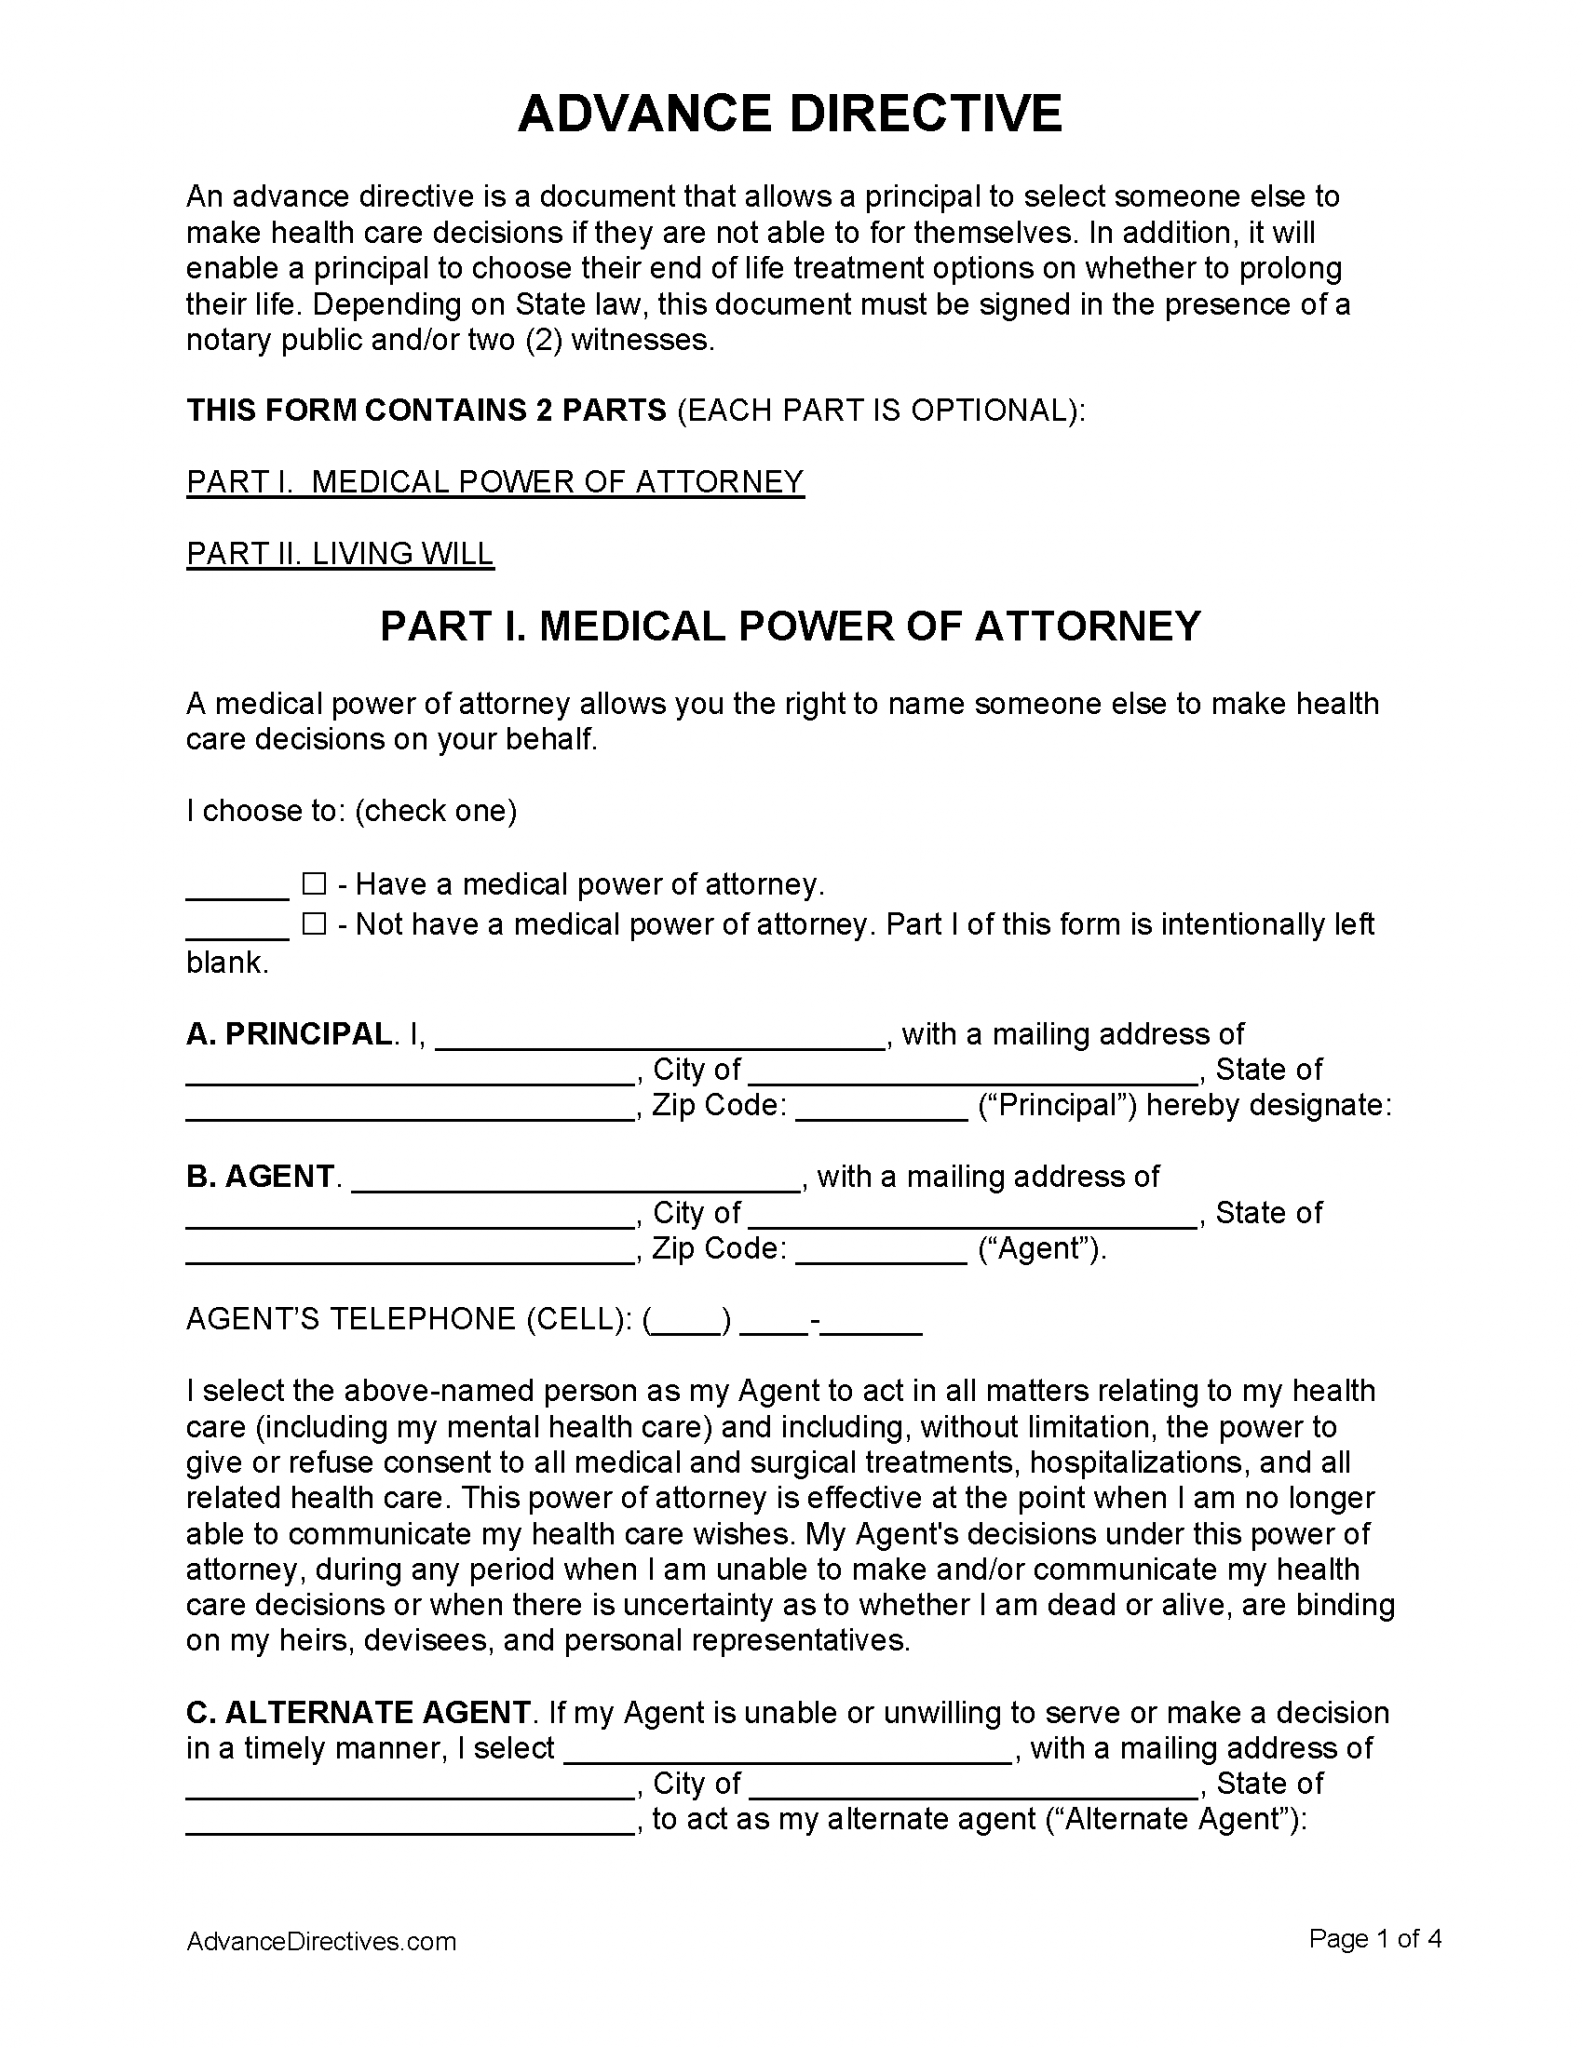 free-advance-directive-forms-pdf-word-odt